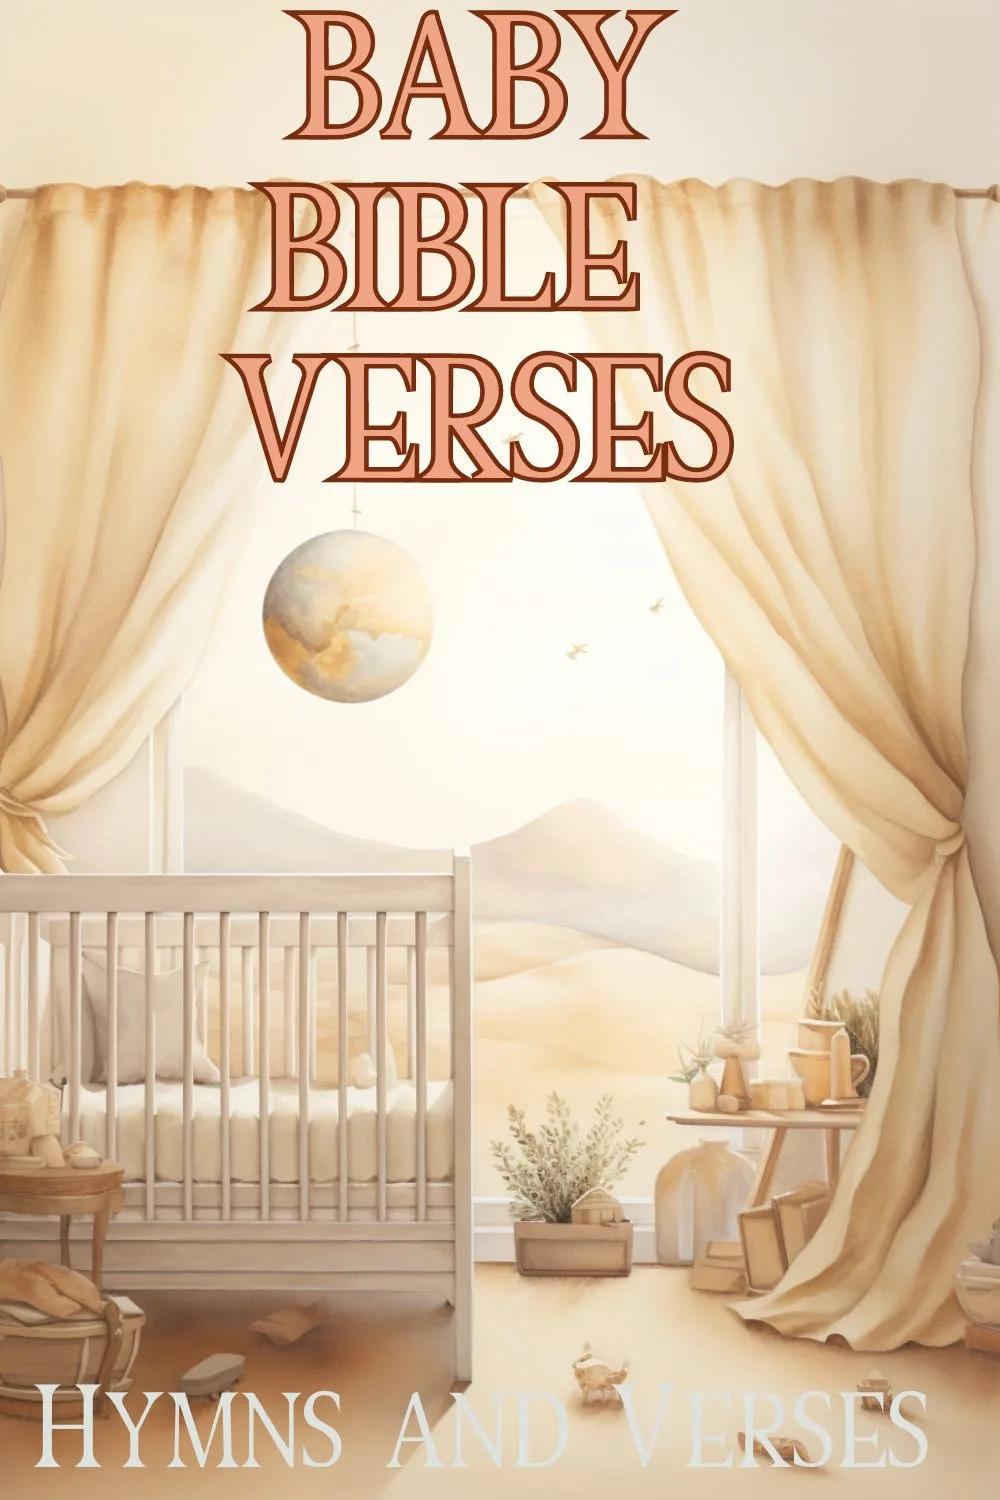 Pin image for baby bible verses - features an illustration of a nursery with a crib in front of a window with the curtains open and landscape outside